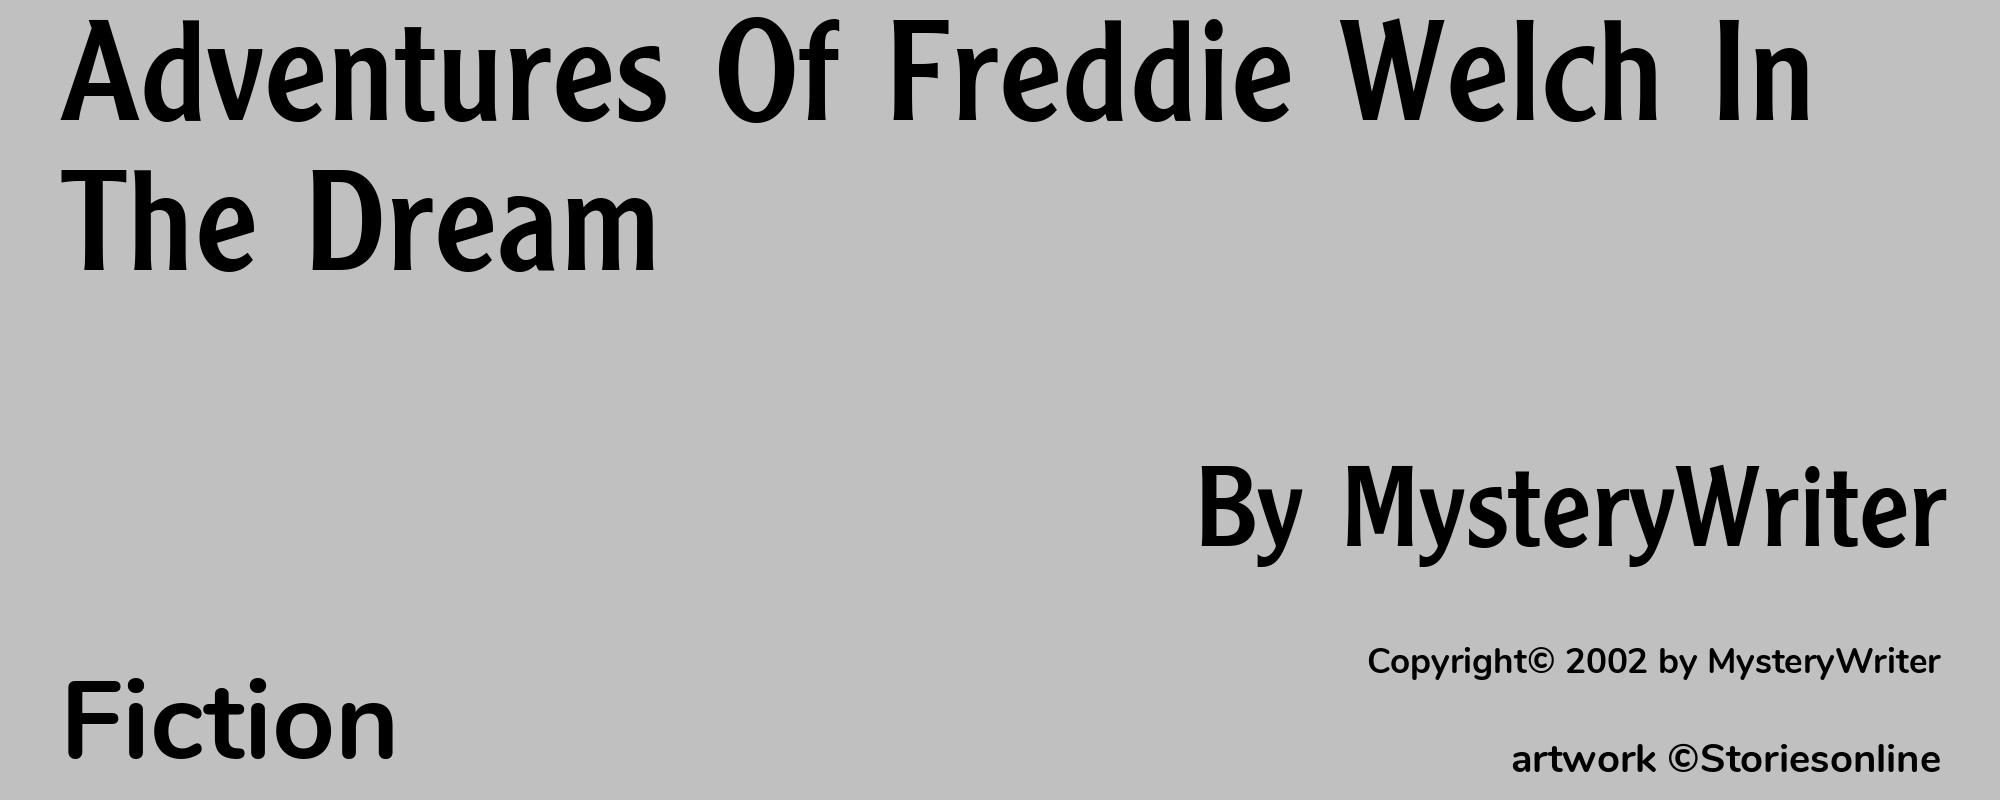 Adventures Of Freddie Welch In The Dream - Cover